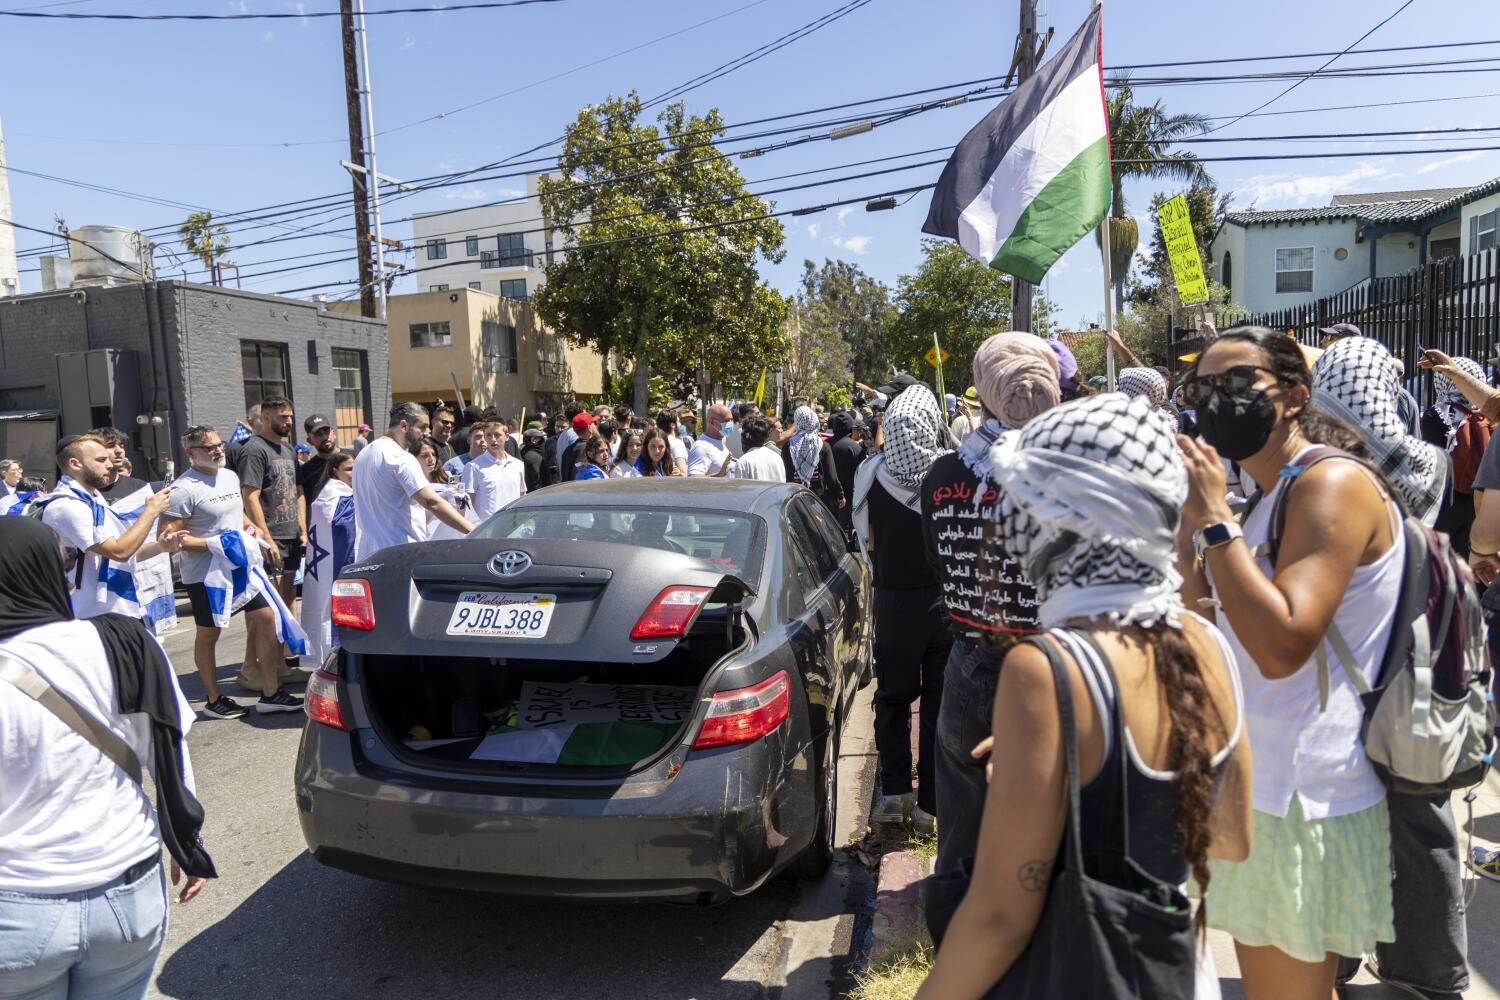 Pro-Palestinian groups sued over demonstration outside L.A. synagogue  